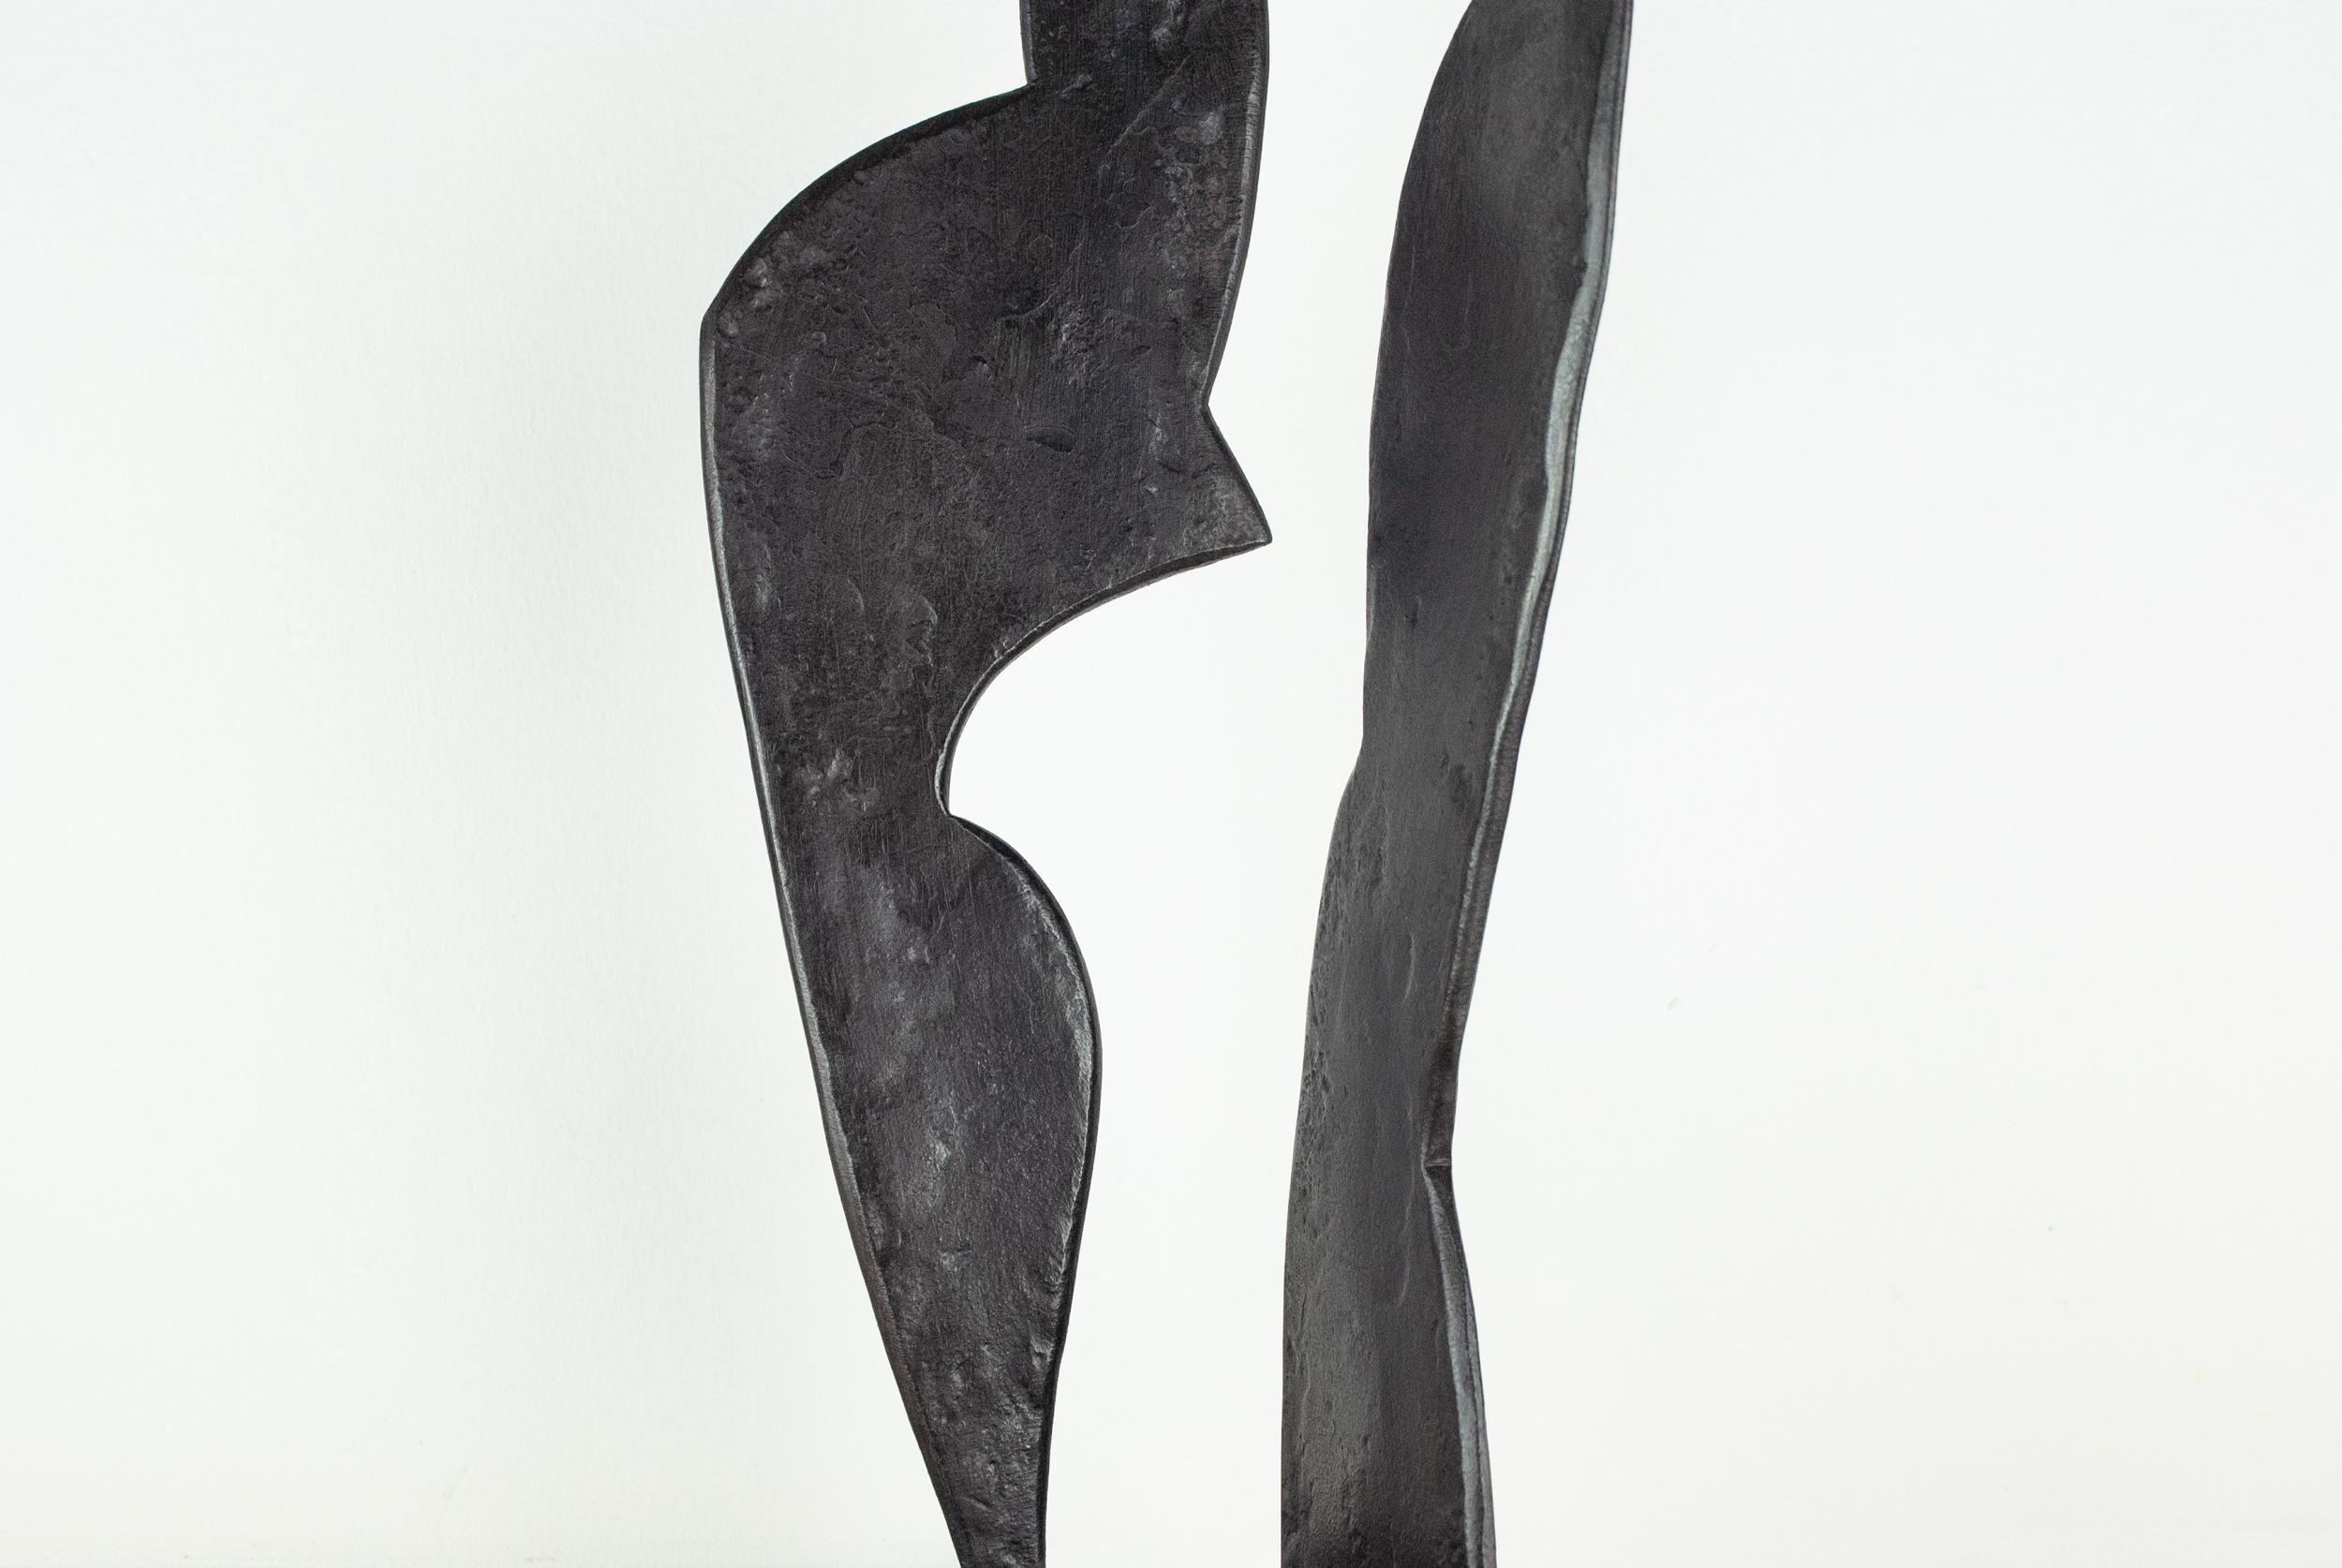 Metal Contemporary Black Forged Steel Sculpture Inspired by H. Bertoia - Two Forms 02 For Sale